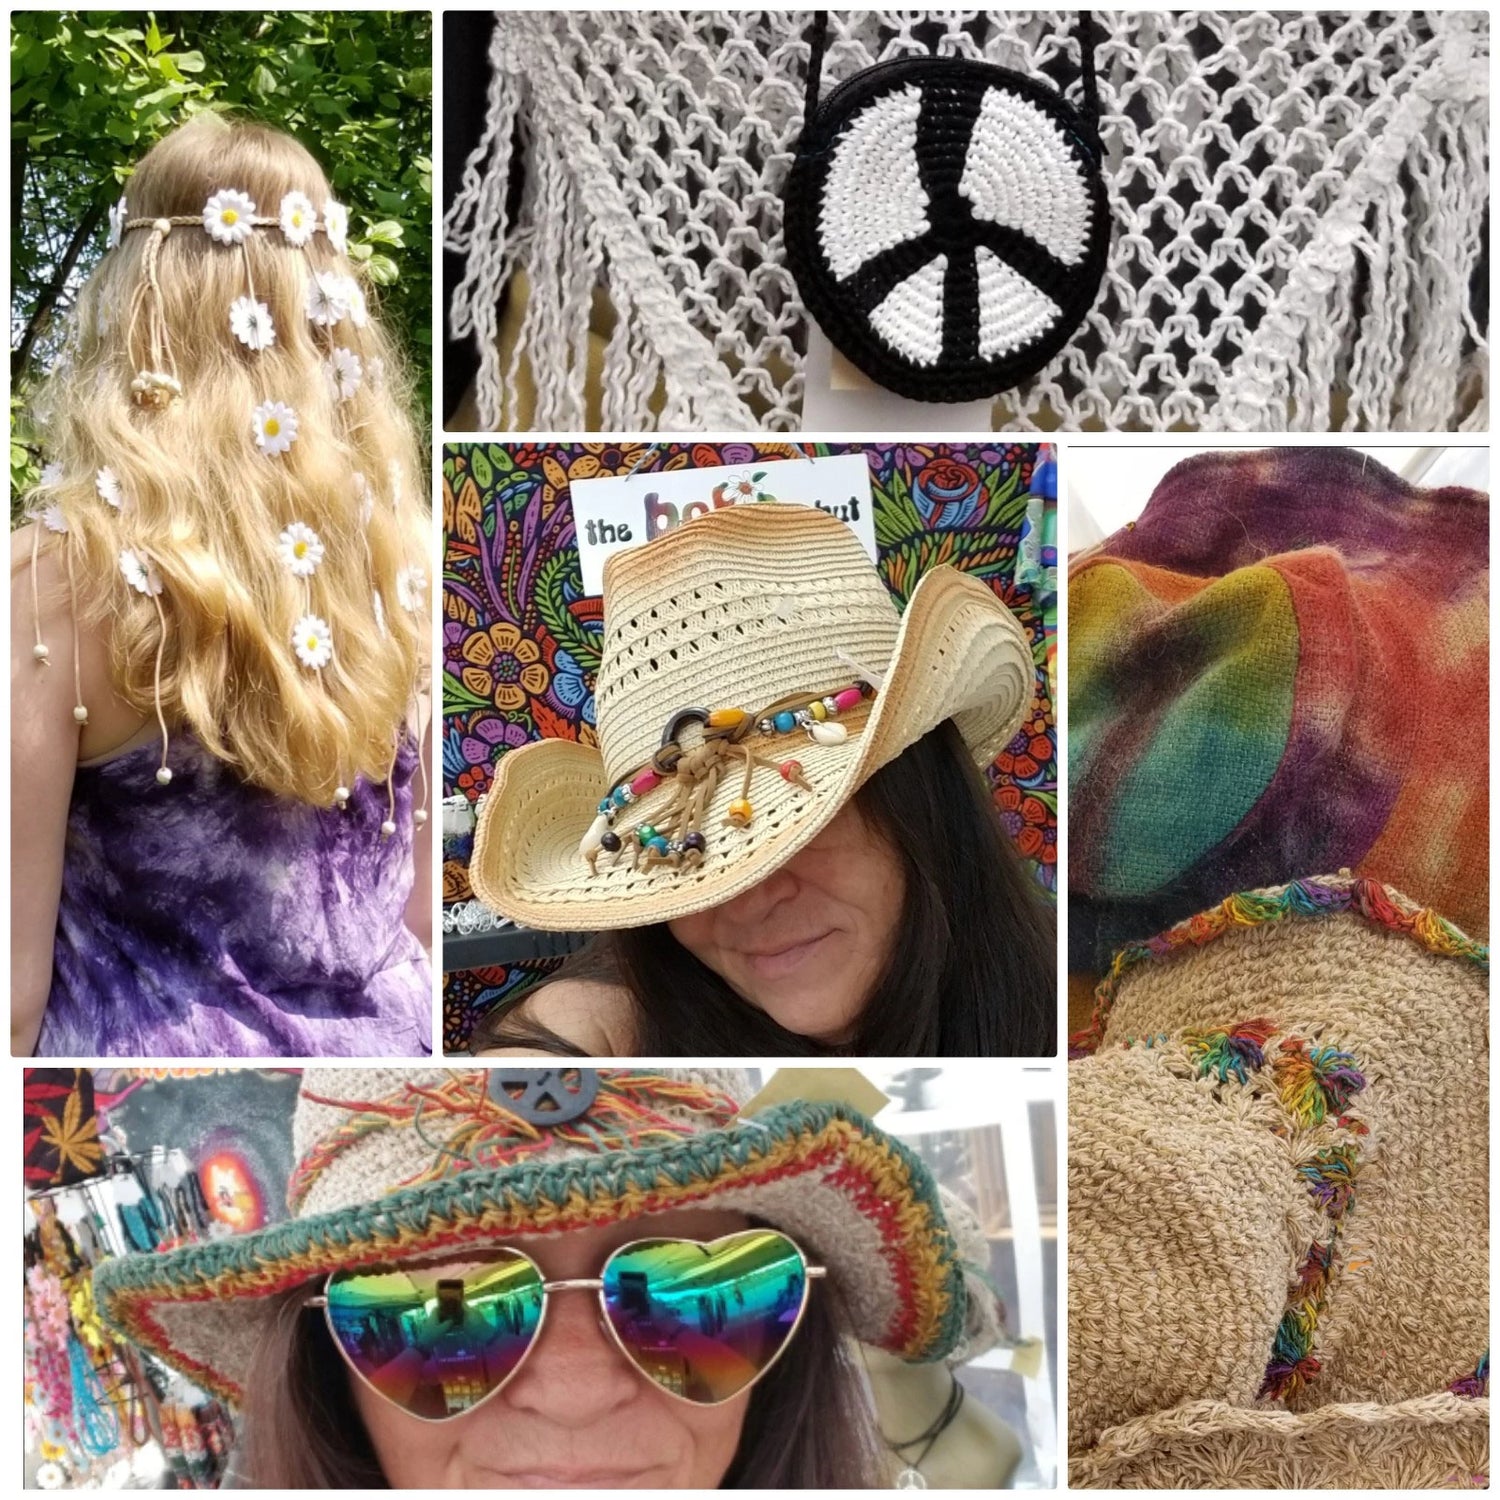 the boho hippie hut has wide selection of unique and stylish boho and hippie accessories inspired by the Bohemian and Hippie lifestyle